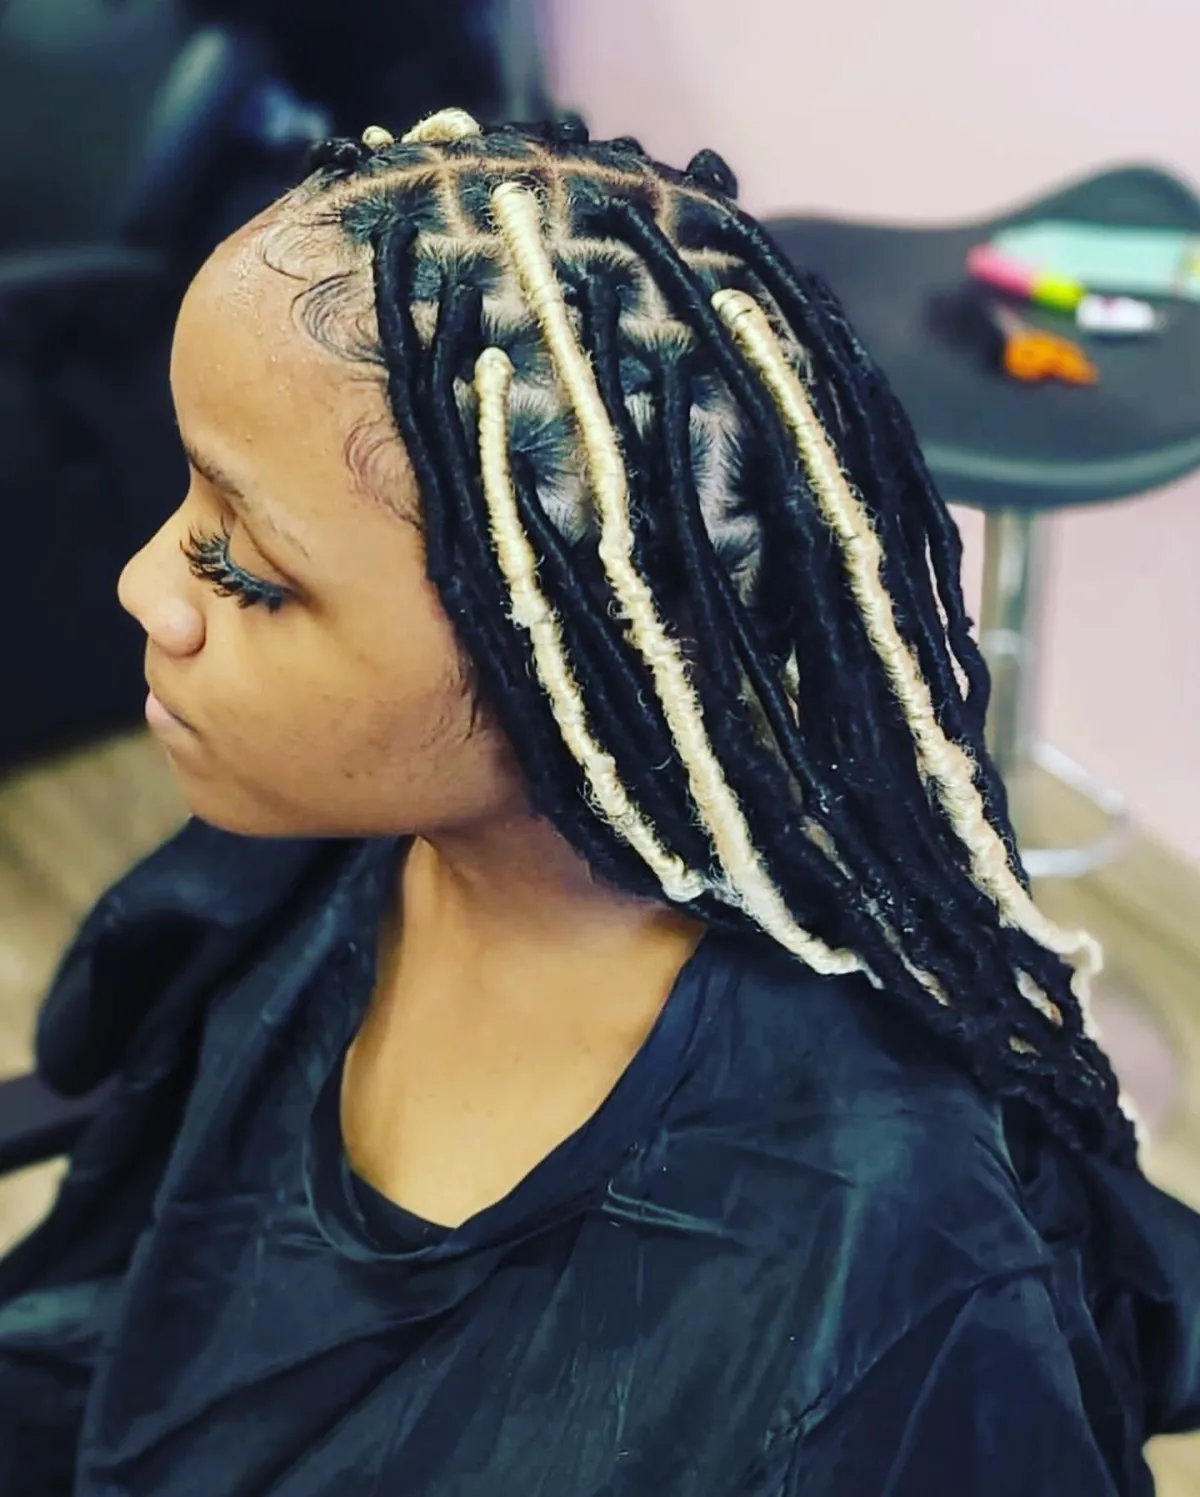 Client with beautifully crafted dreadlocks at Mary Braids, the African hair braiding specialists in Omaha.